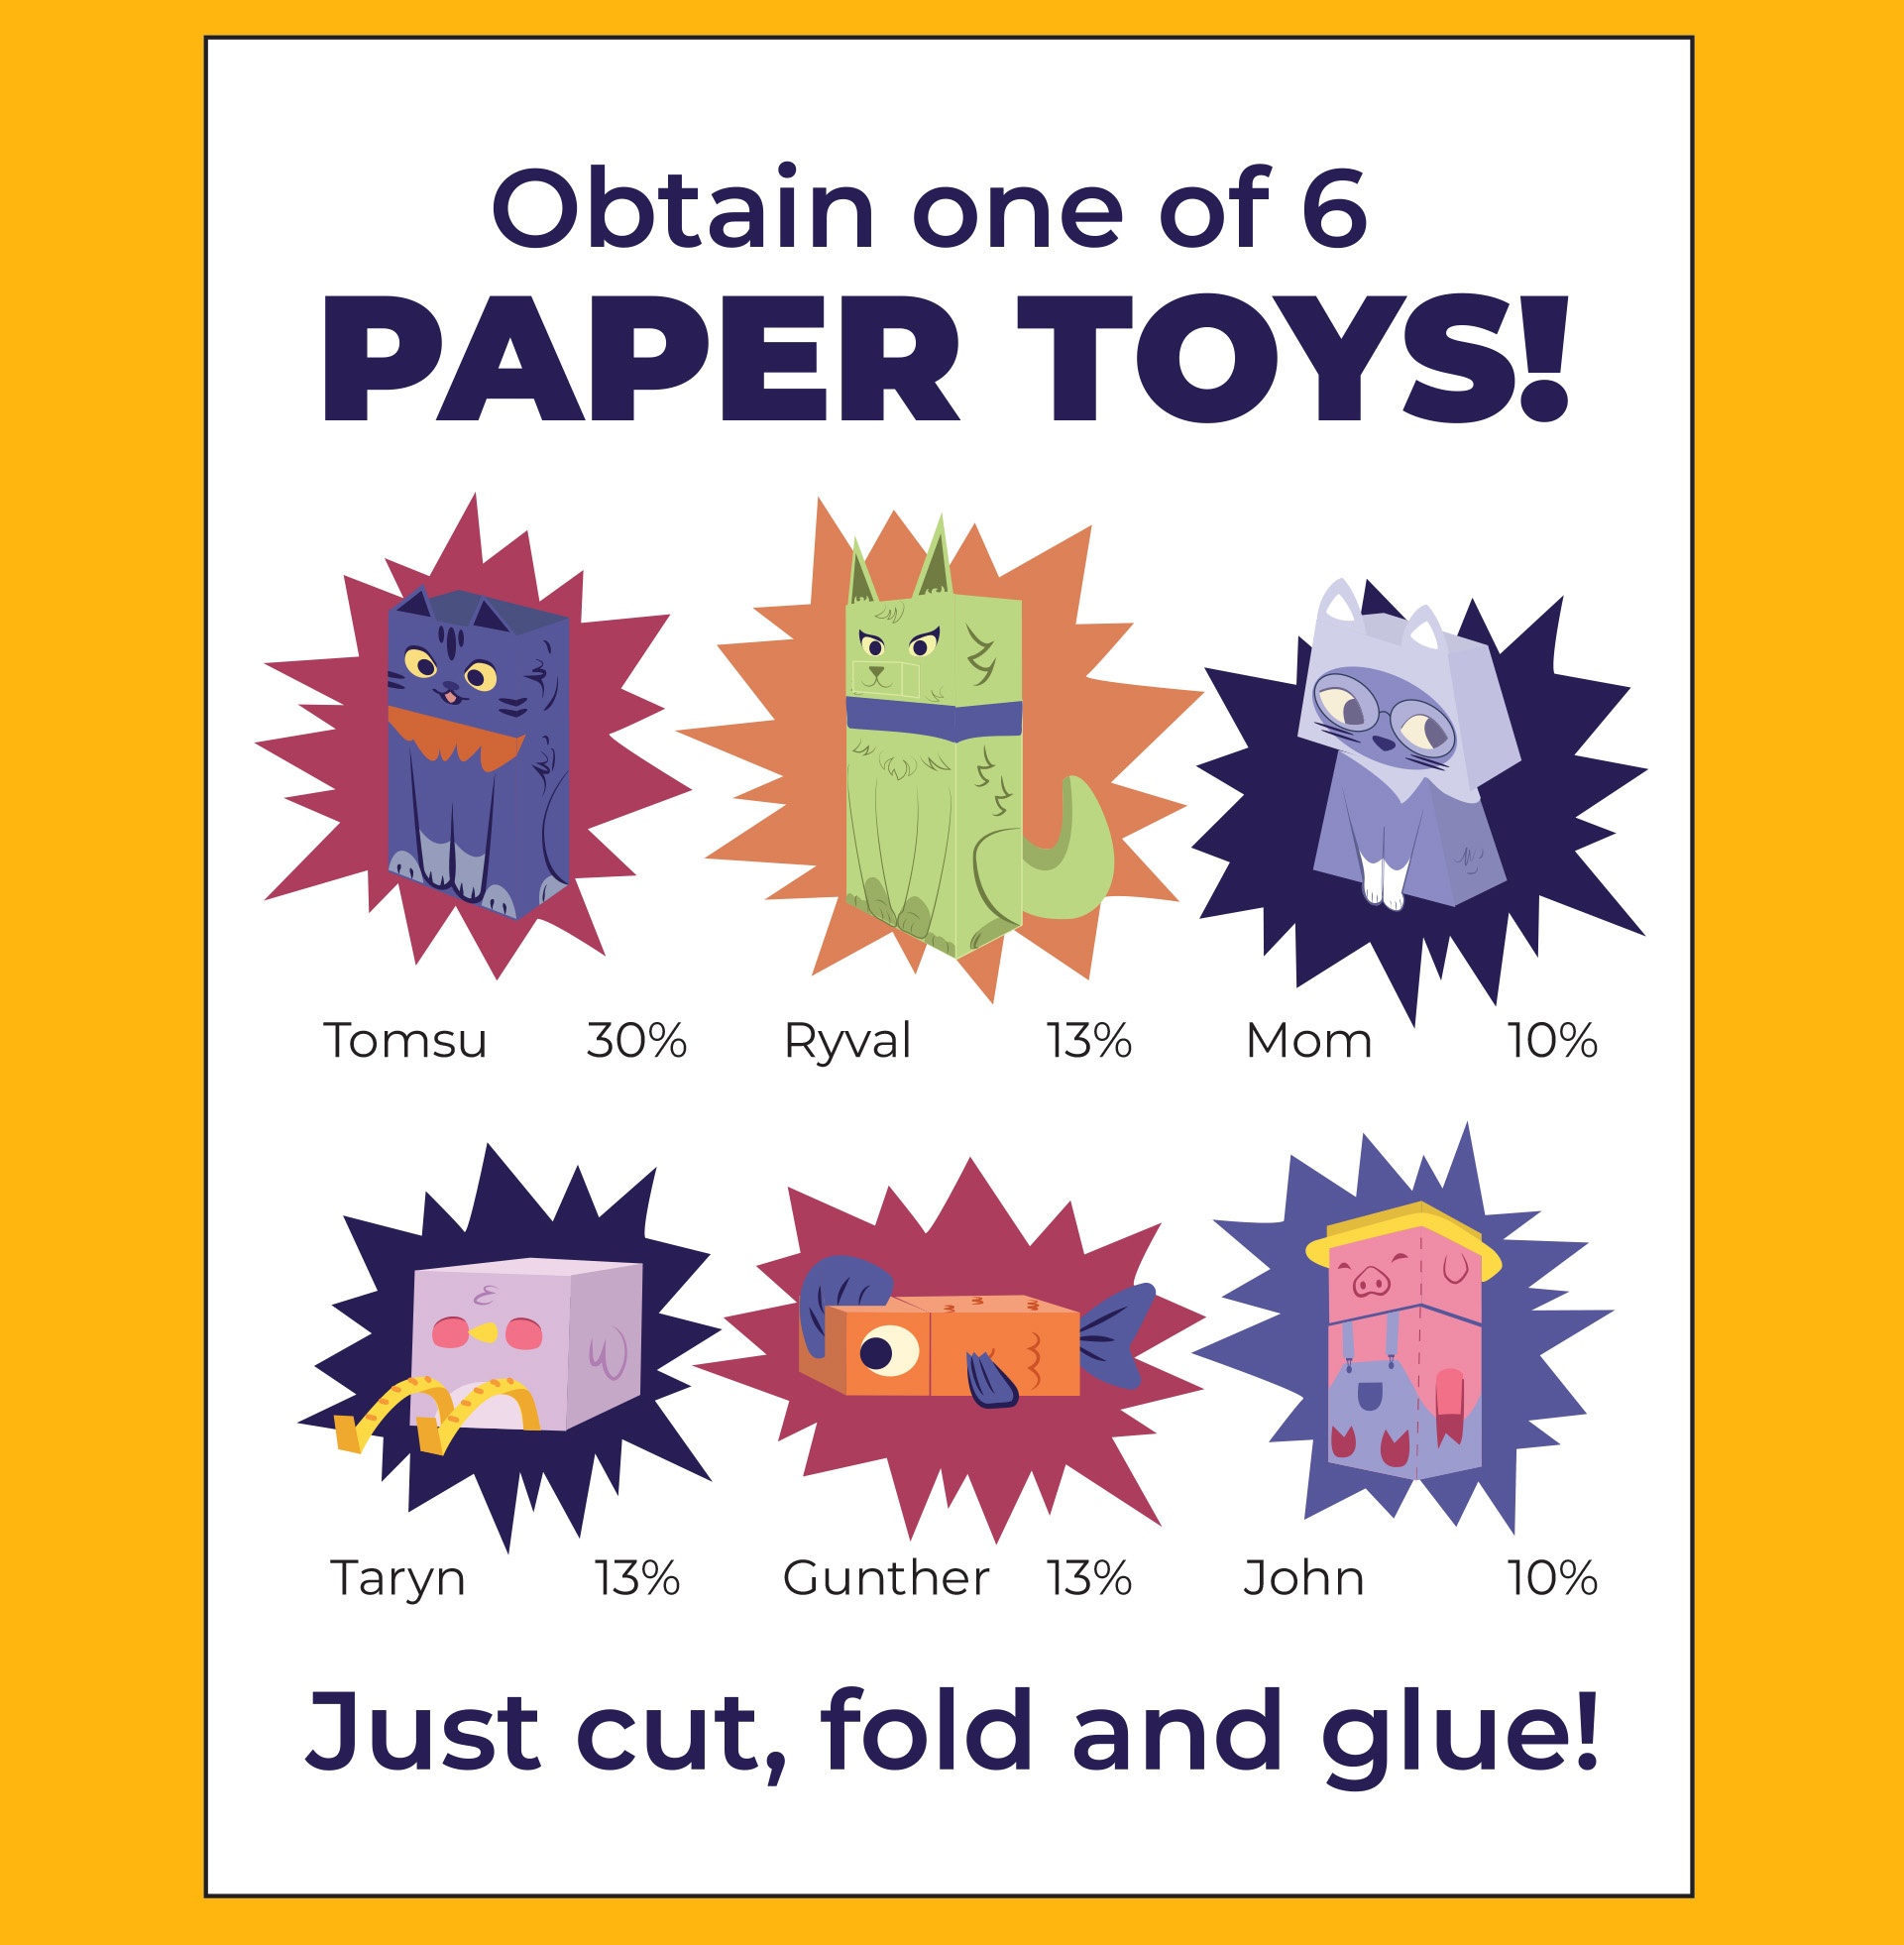 Label for the Tomsu paper toys.